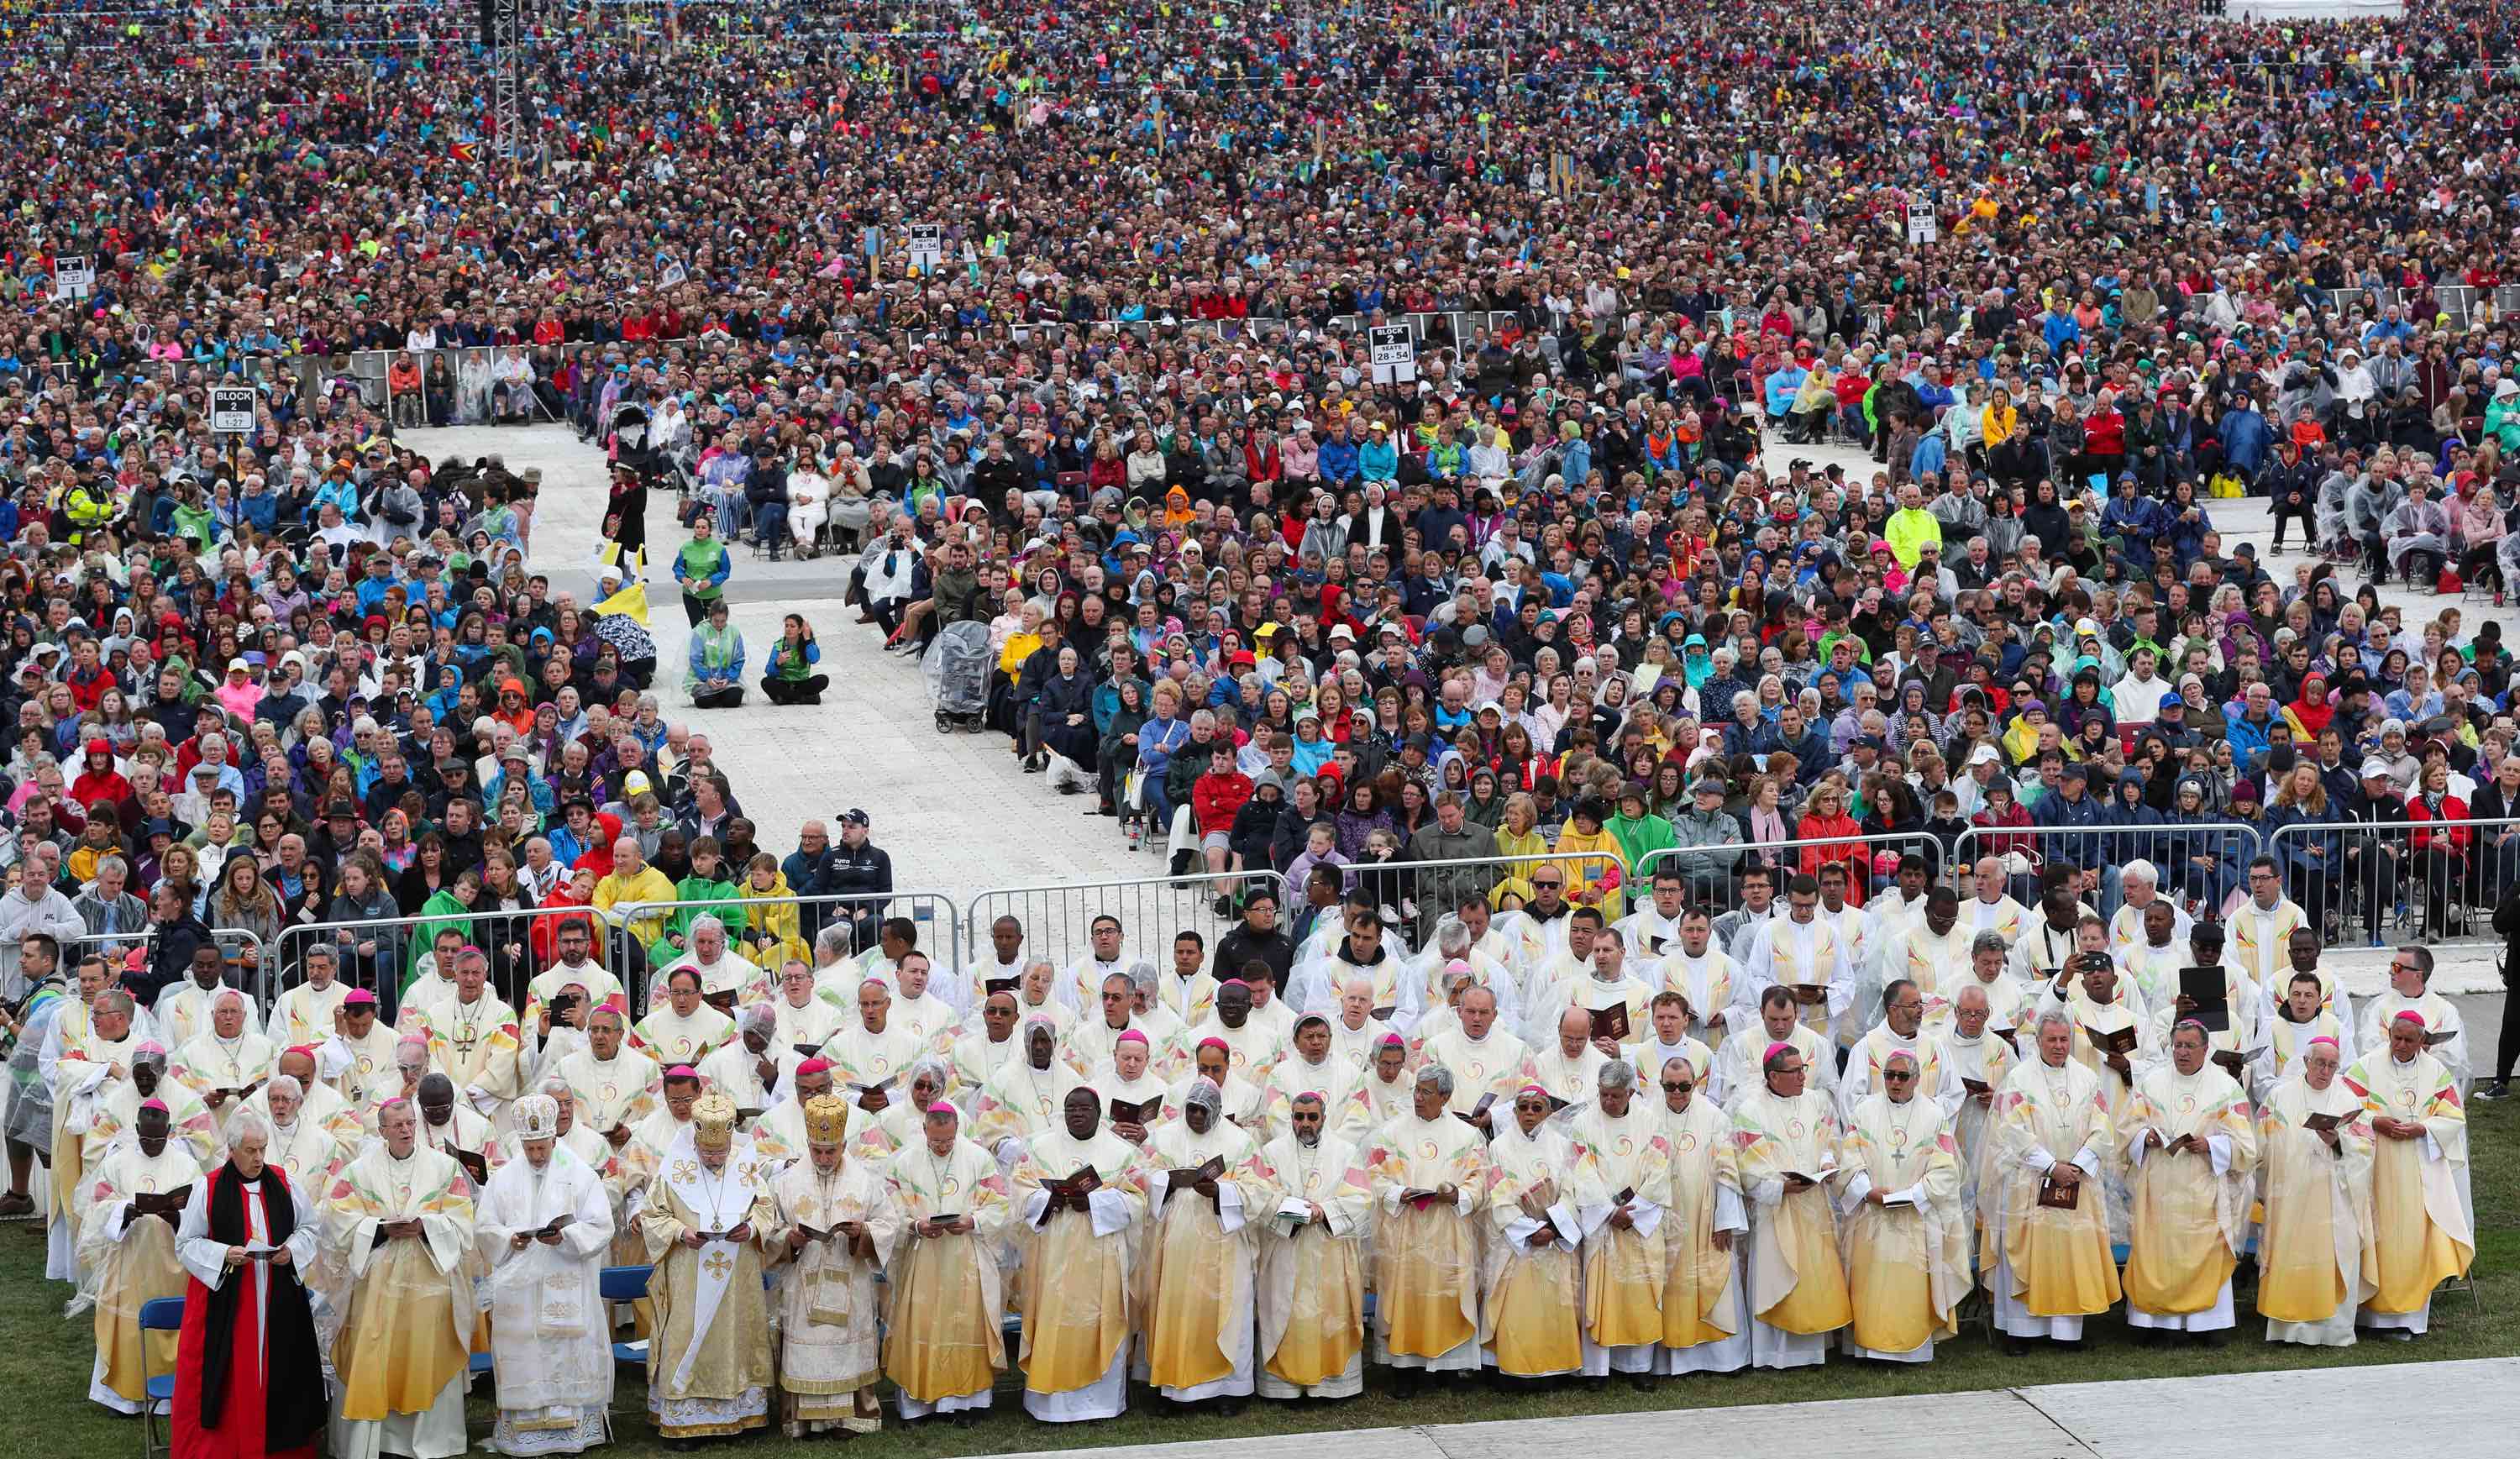 The Mass at the Phoenix Park.